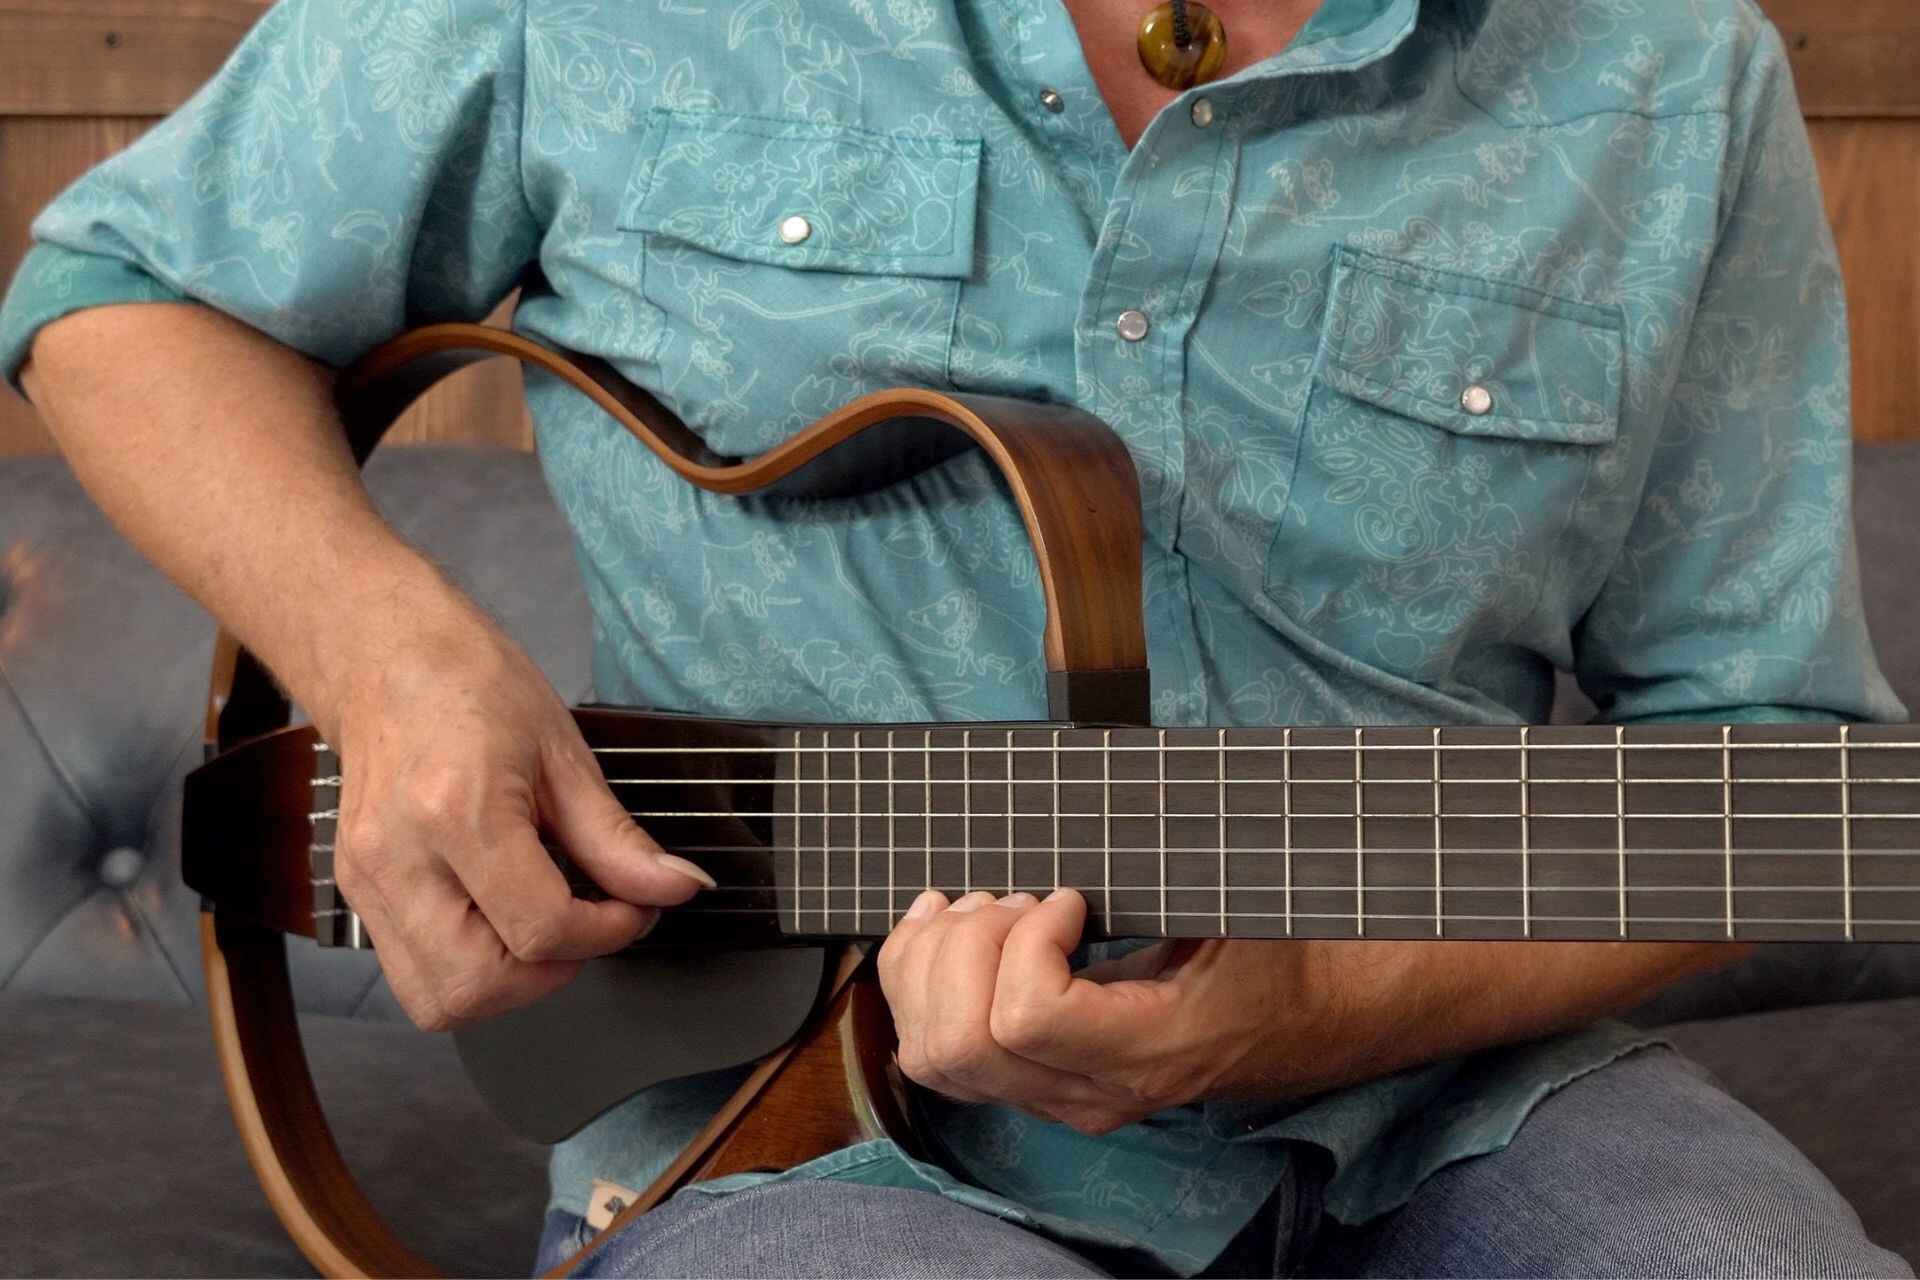 Double Note When Fingering High On The Fretboard On An Acoustic Guitar